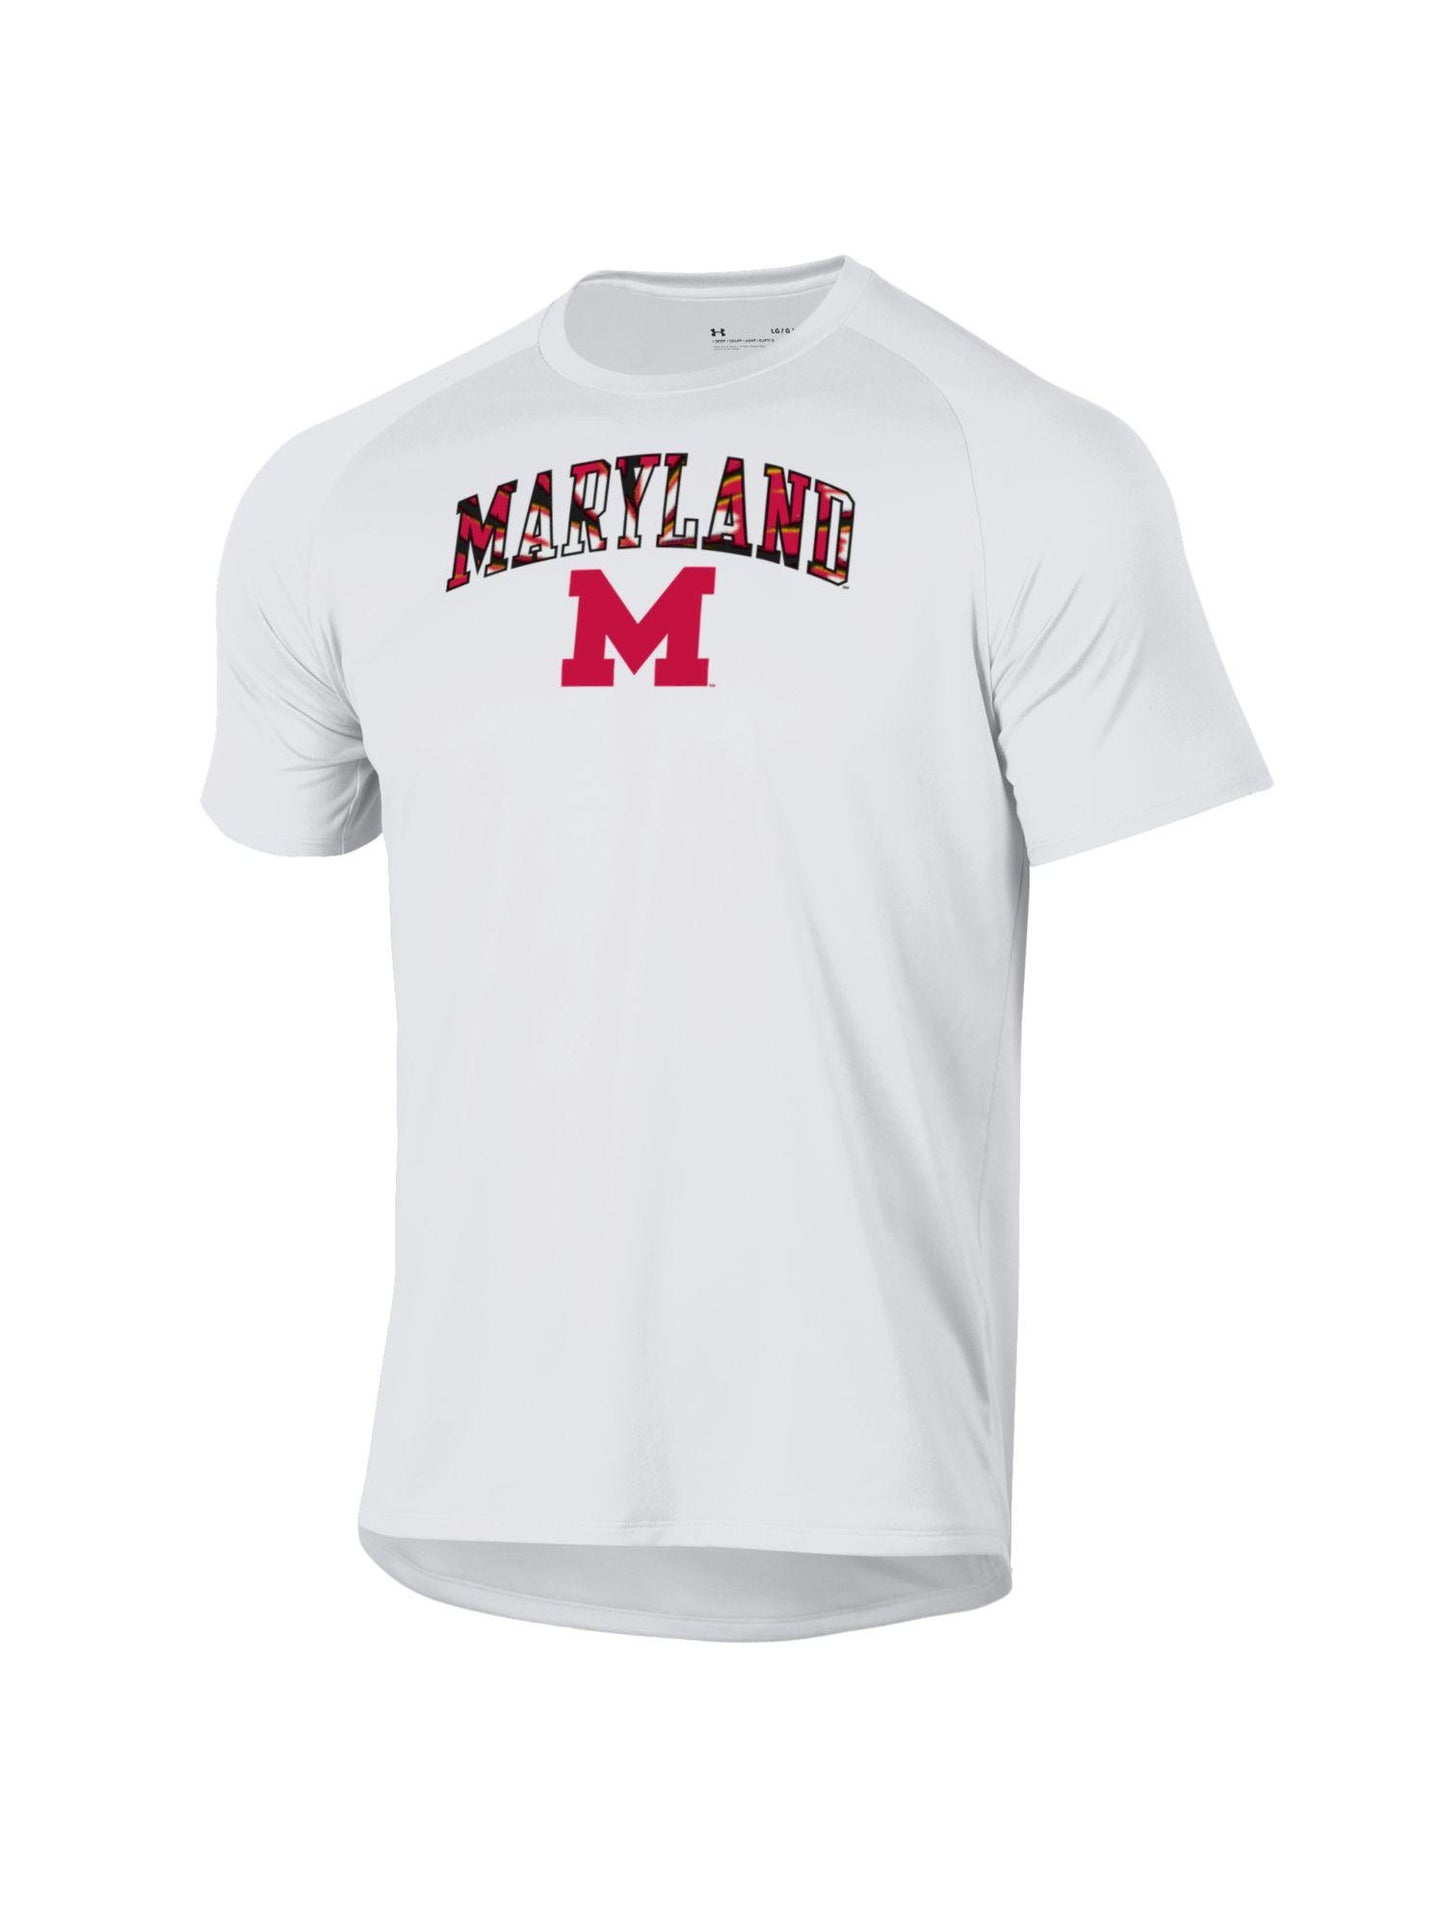 Under Armour Maryland Tech T-Shirt (White)